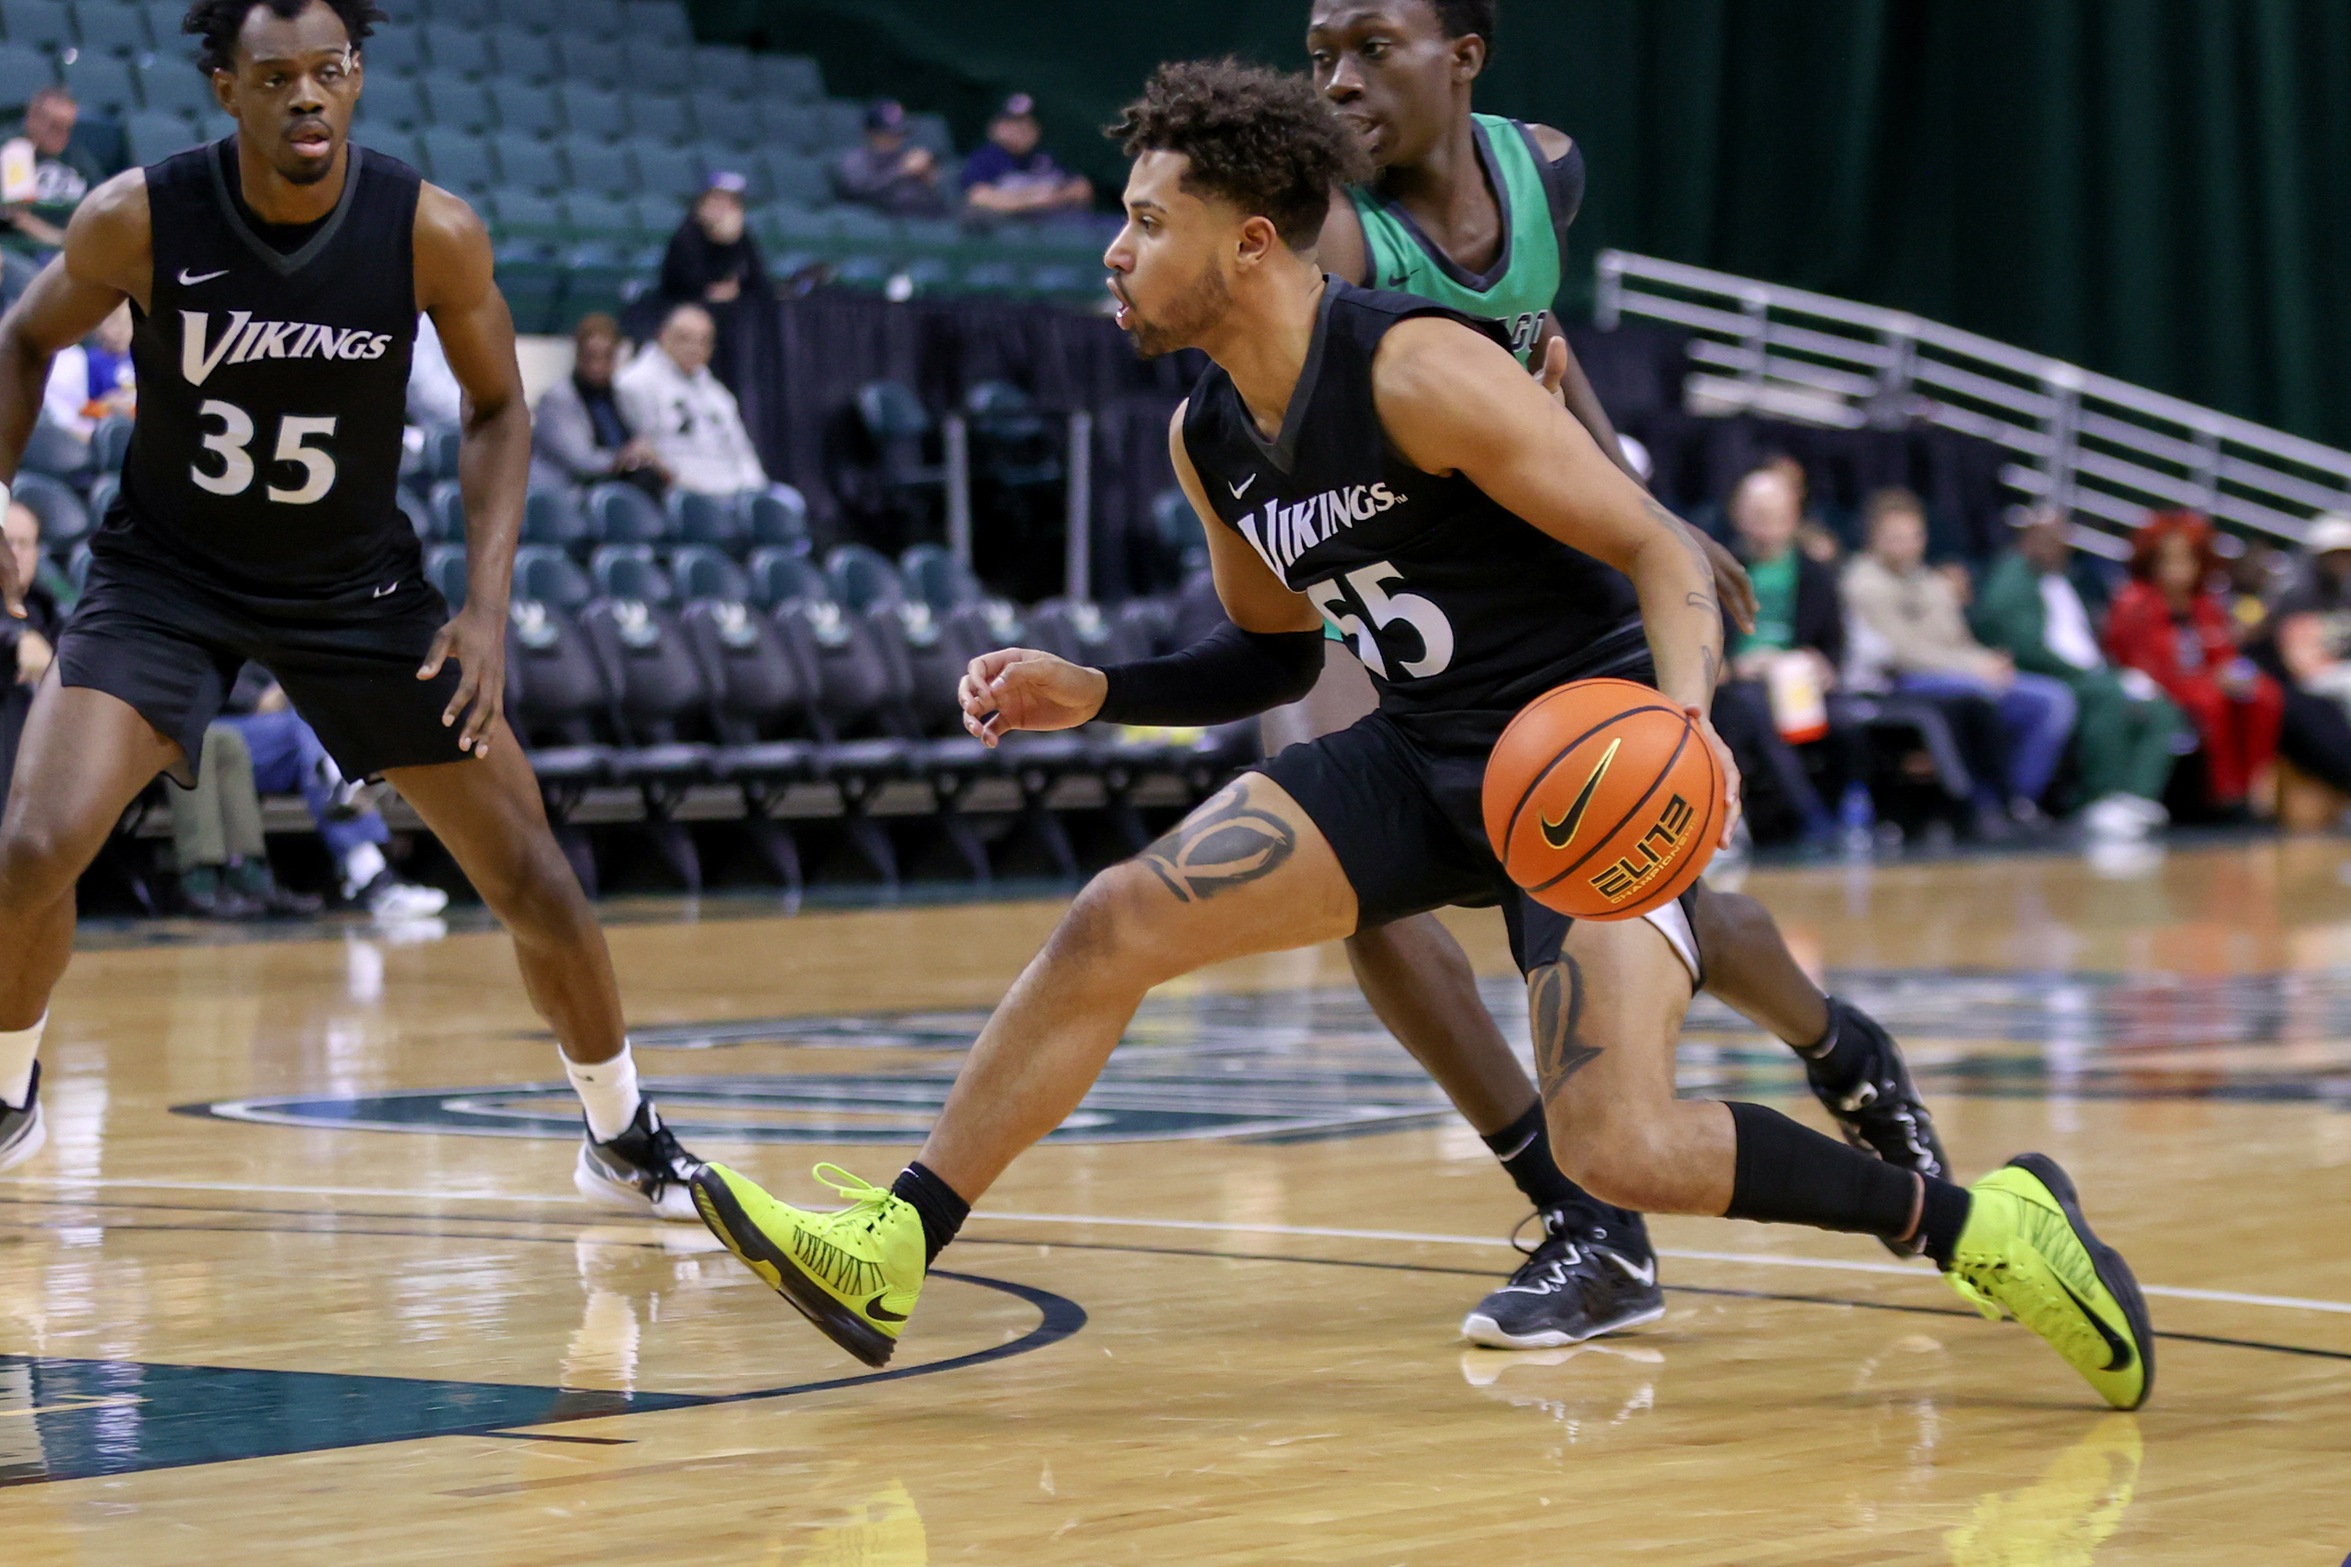 Cleveland State Men's Basketball Set for Non-Conference Matchup at Western Michigan